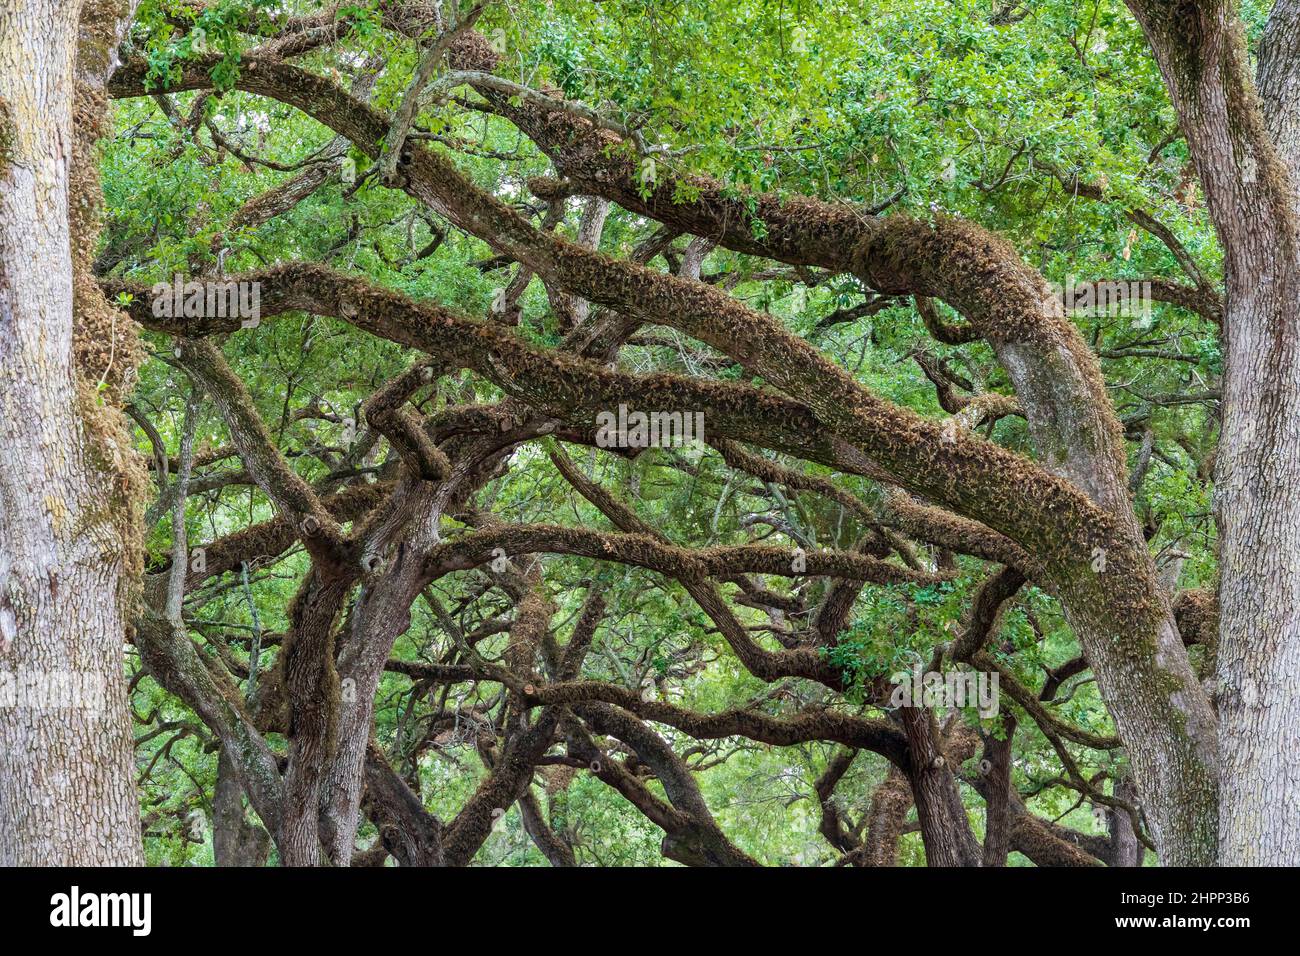 Overarching branches of southern live oak trees (Quercus virginiana) at Topeekeegee Yugnee (TY) Park - Hollywood, Florida, USA Stock Photo